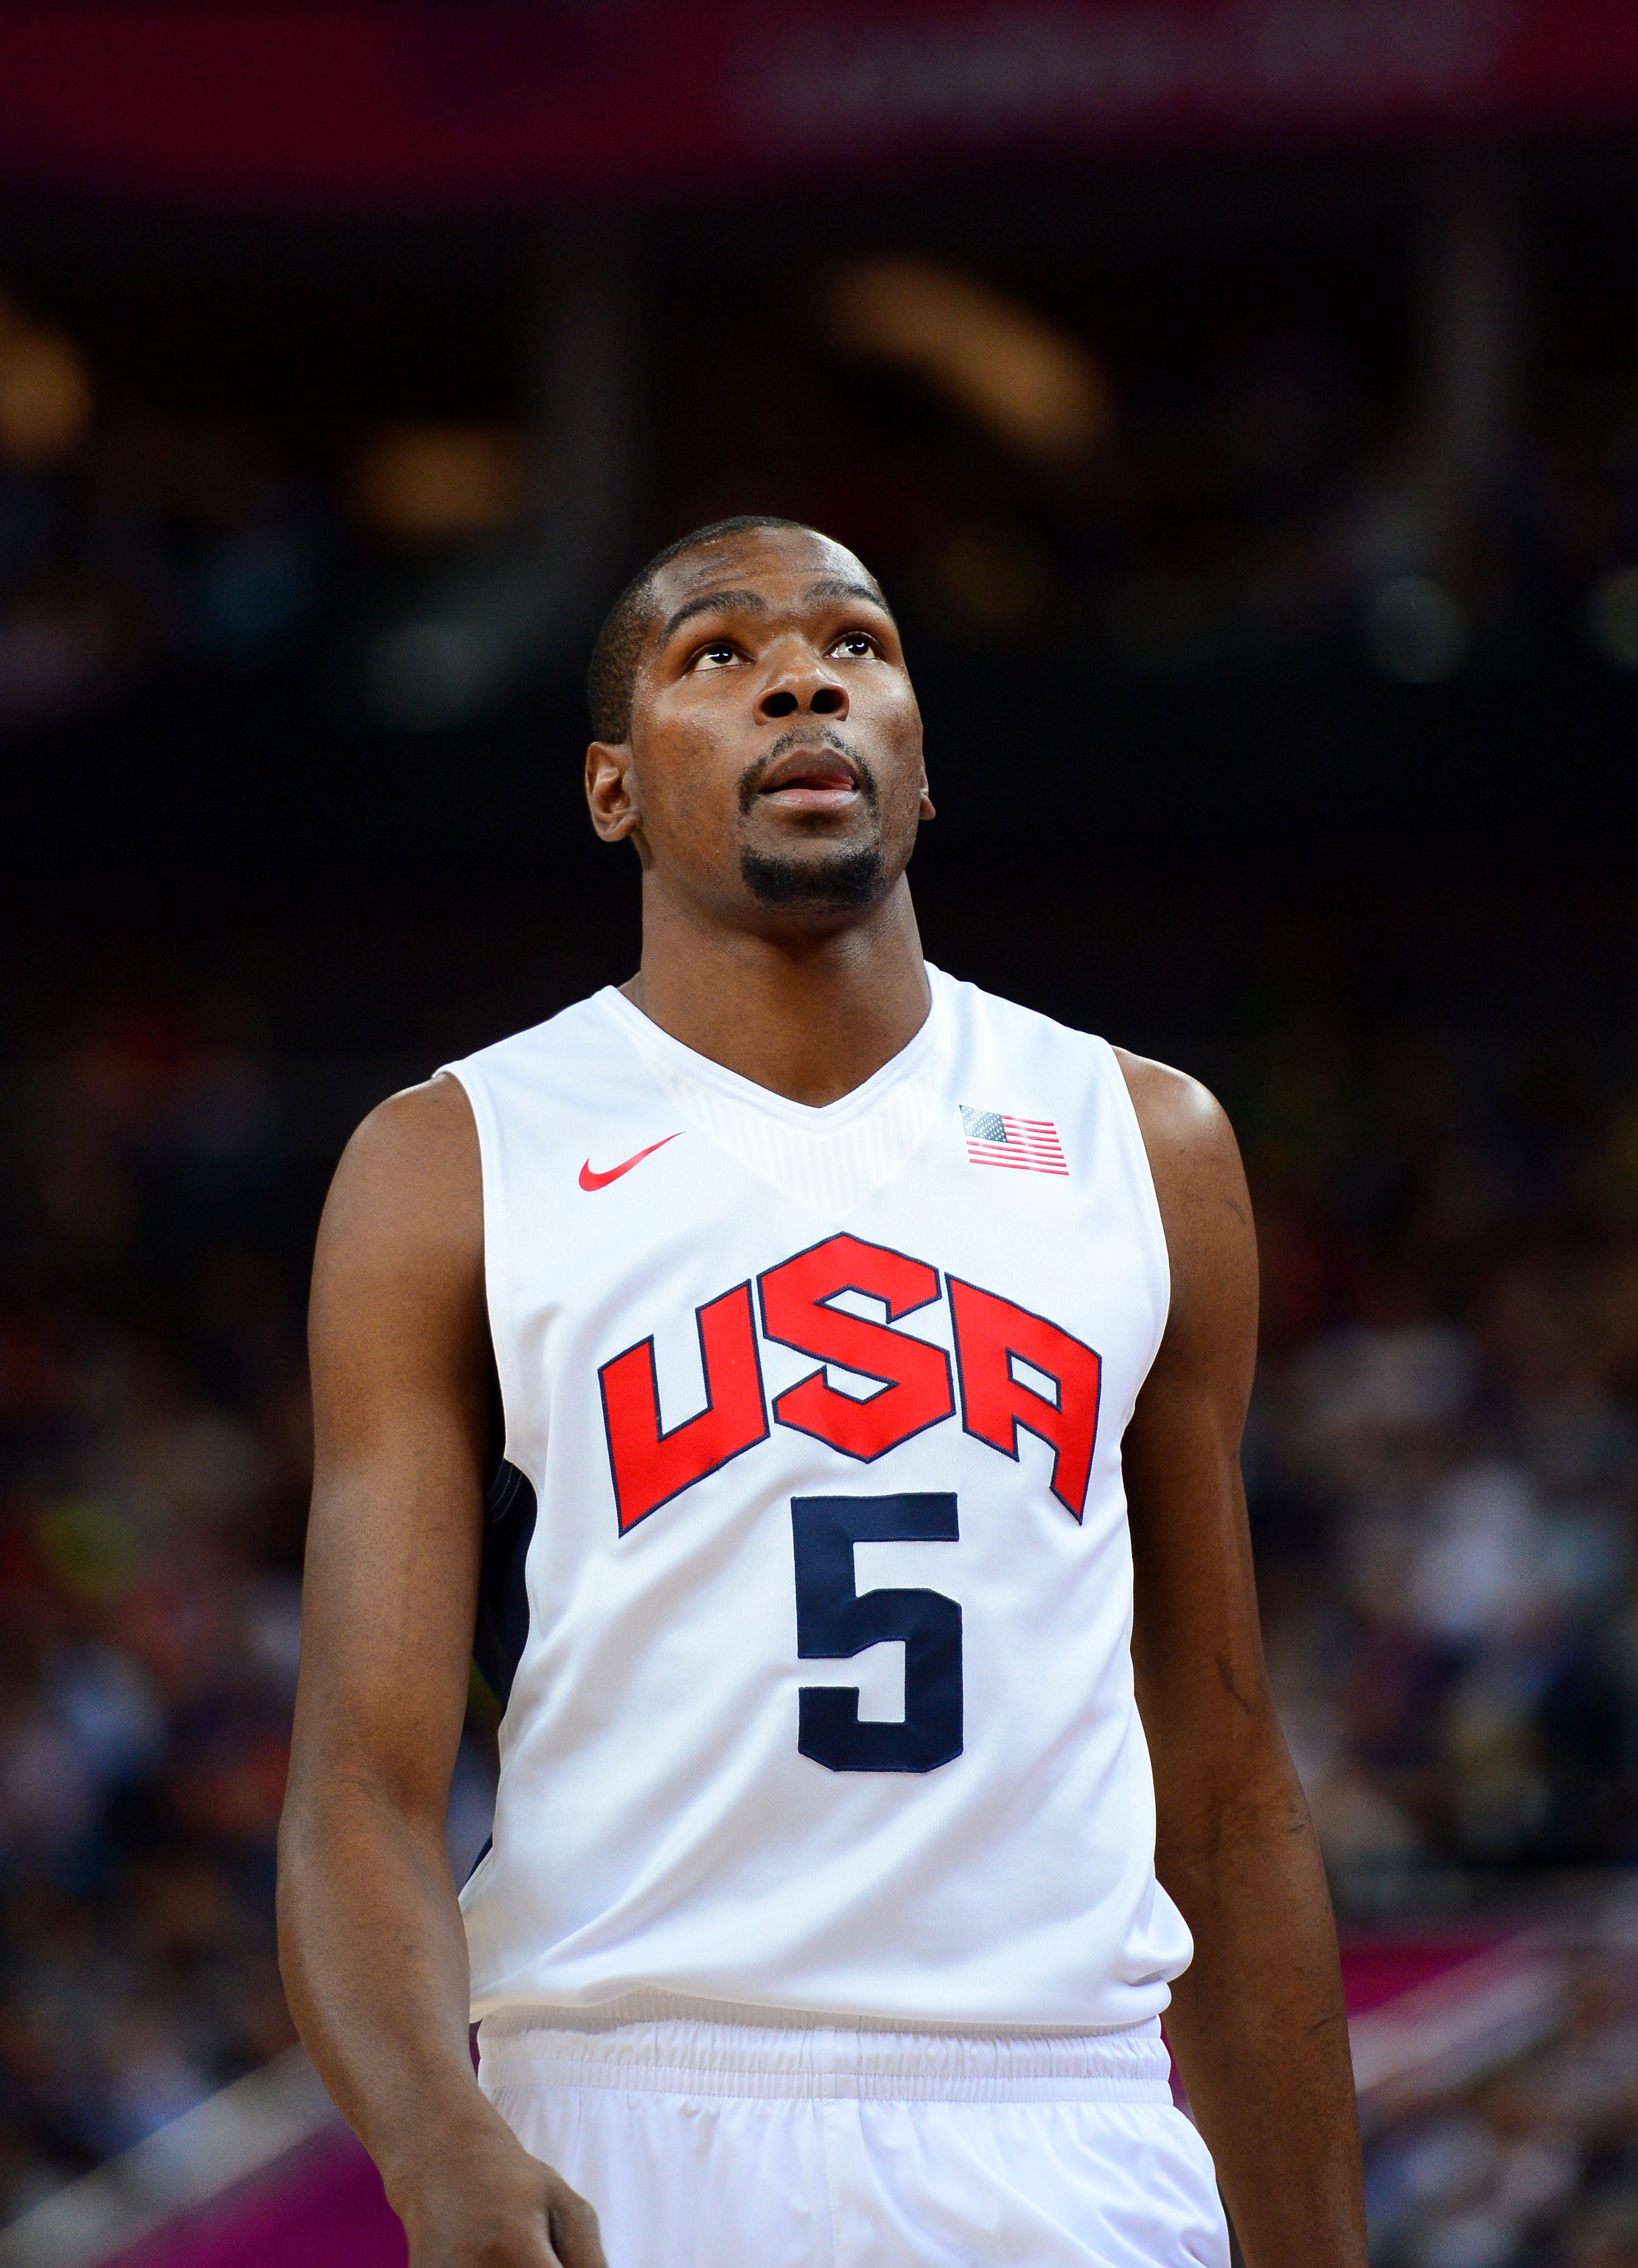 kevin durant usa jersey for sale